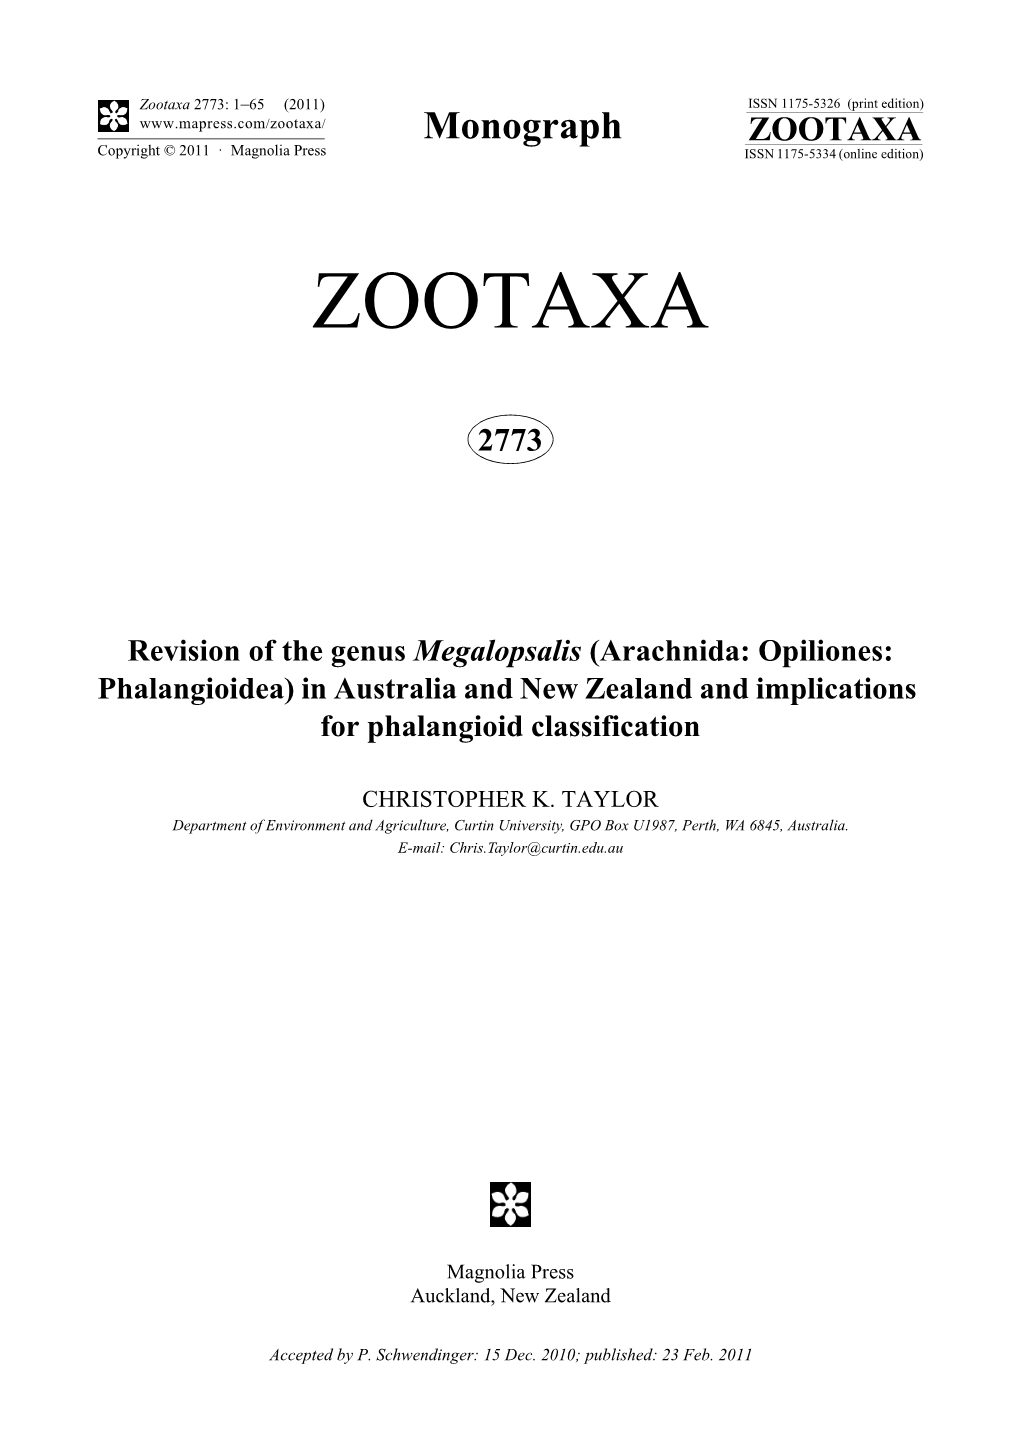 Revision of the Genus Megalopsalis (Arachnida: Opiliones: Phalangioidea) in Australia and New Zealand and Implications for Phalangioid Classification